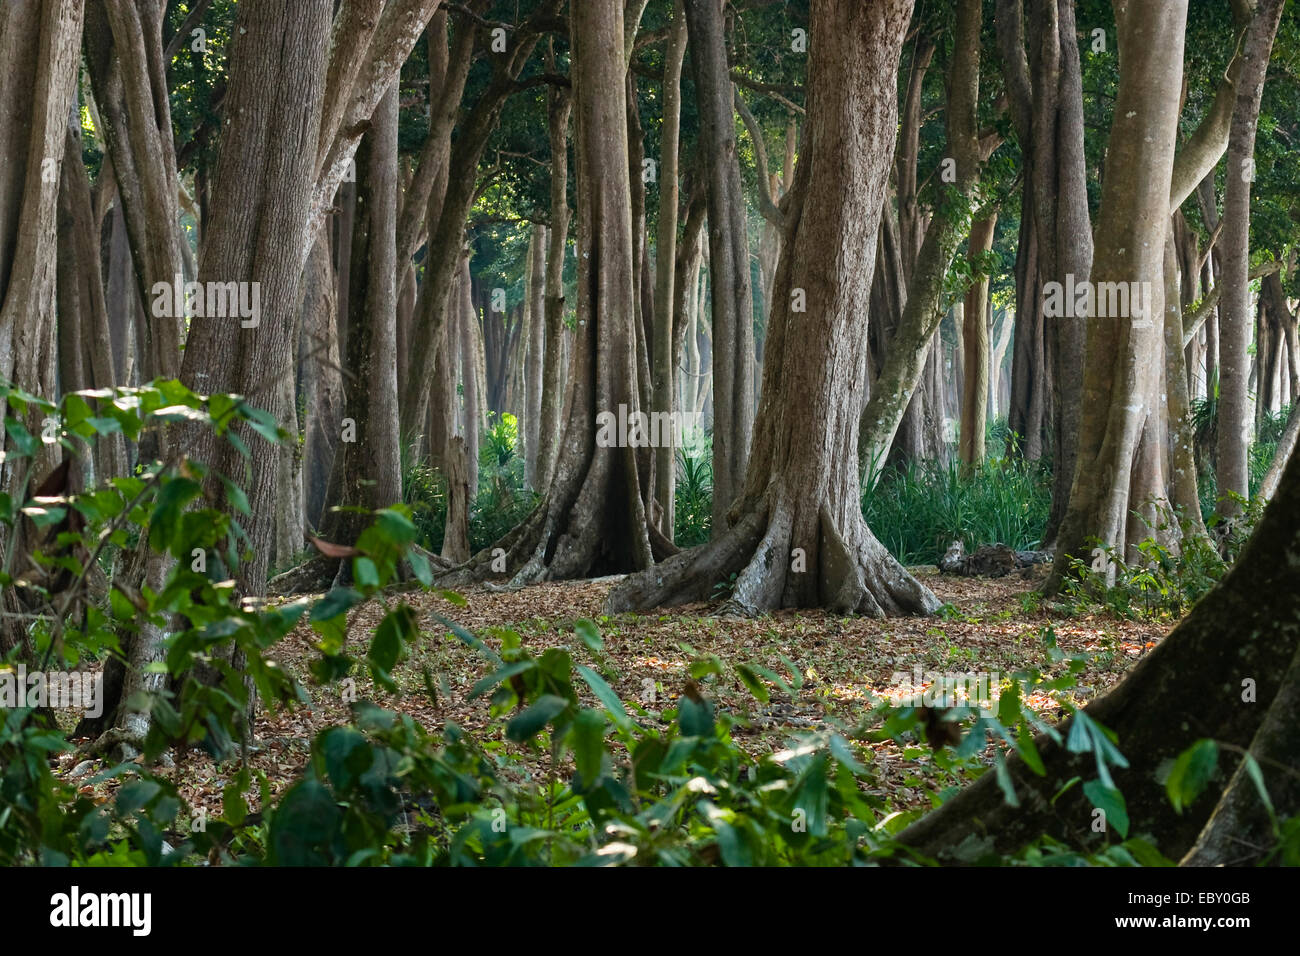 big trees with buttress roots in tropical rainforest, India, Andaman Islands, Havelock Island Stock Photo